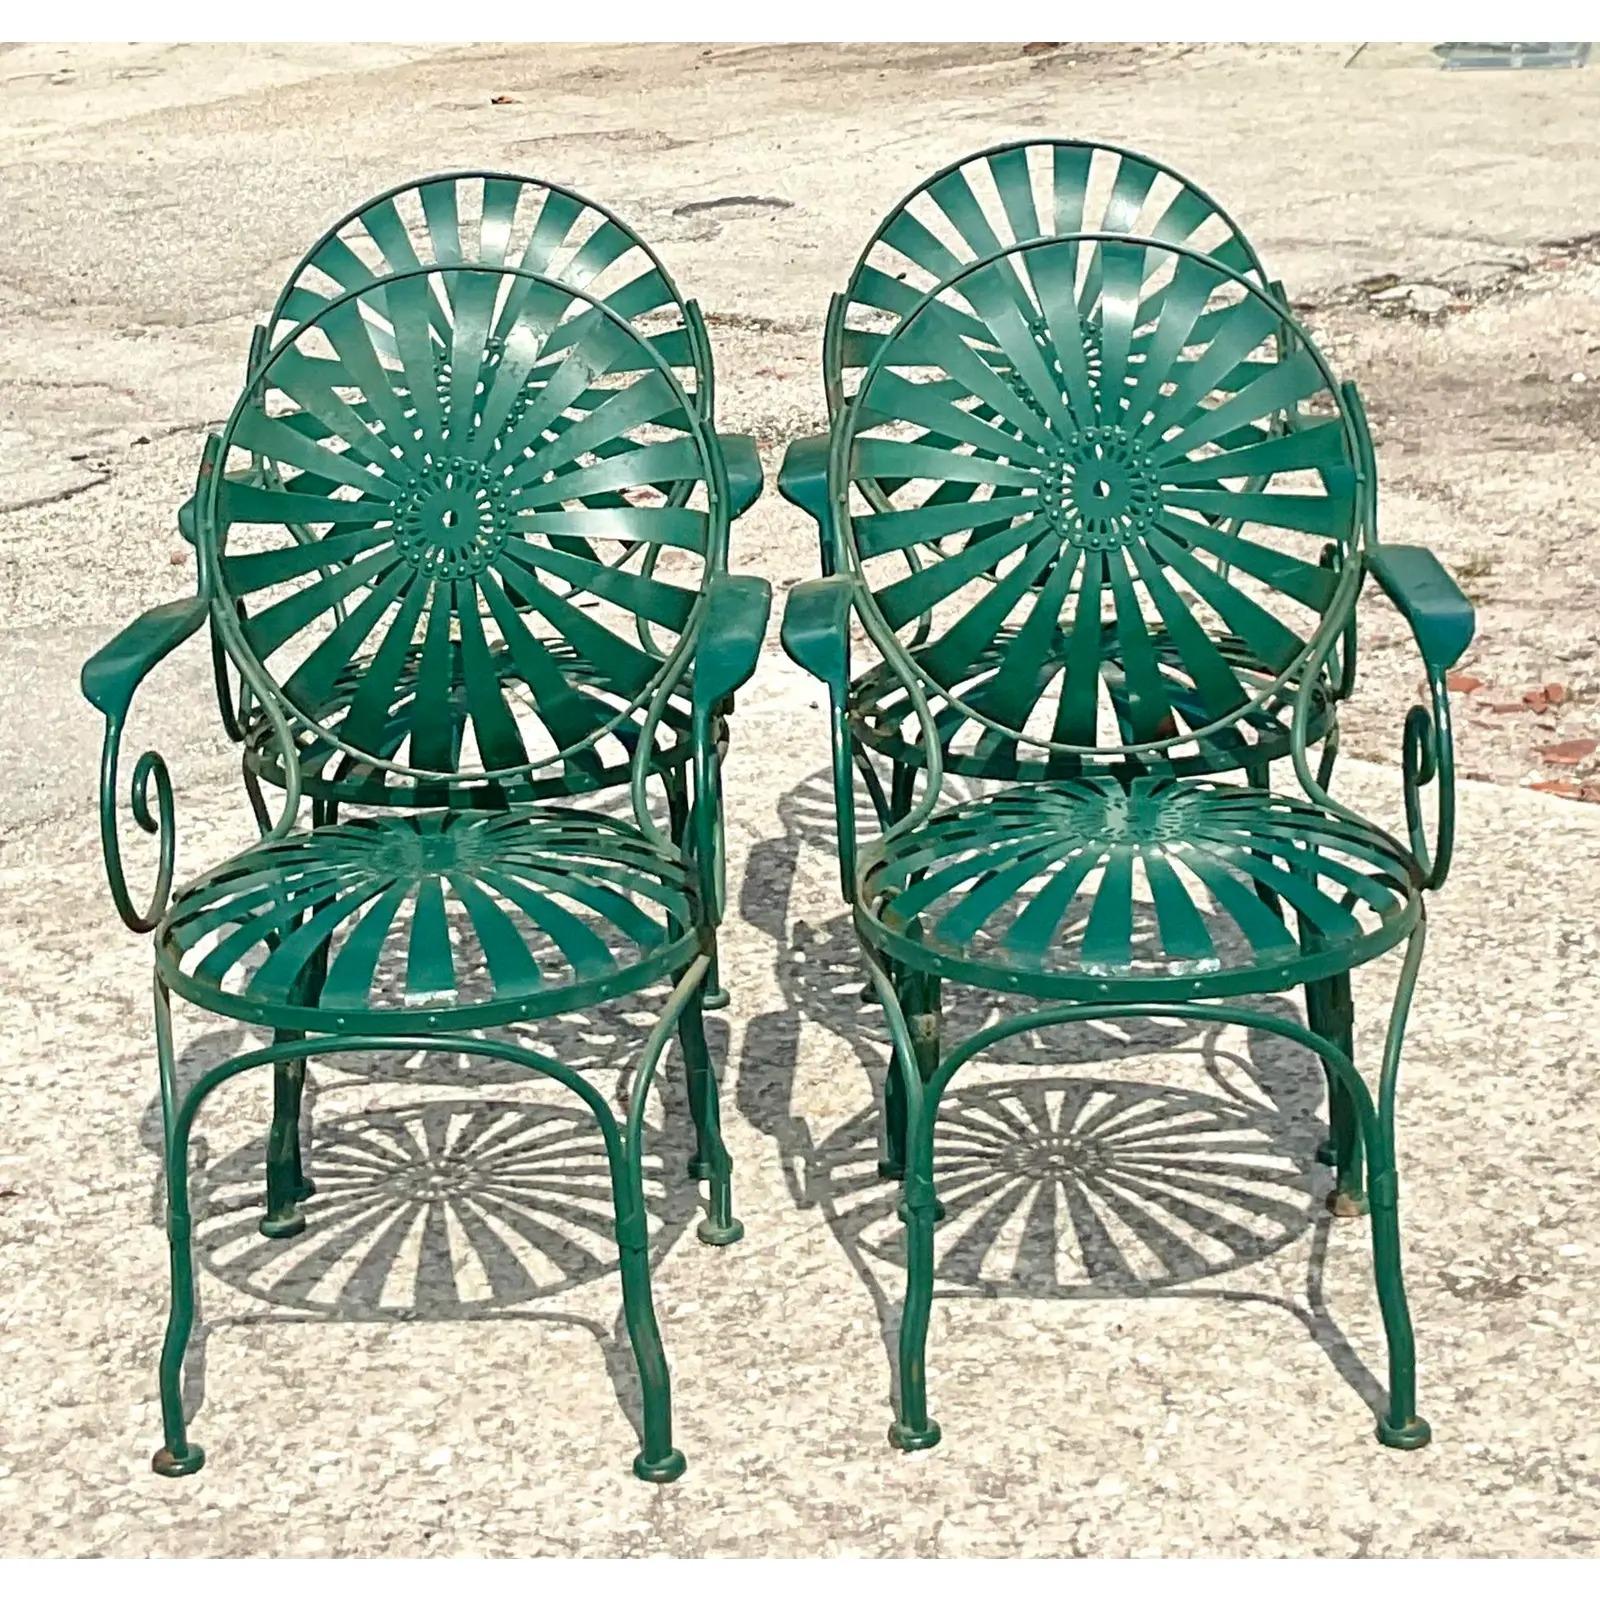 Fantastic set of 4 vintage wrought iron dining chairs. Designed by the iconic Francois Carre. Super coveted pinwheel style. Acquired from a Palm Beach estate.